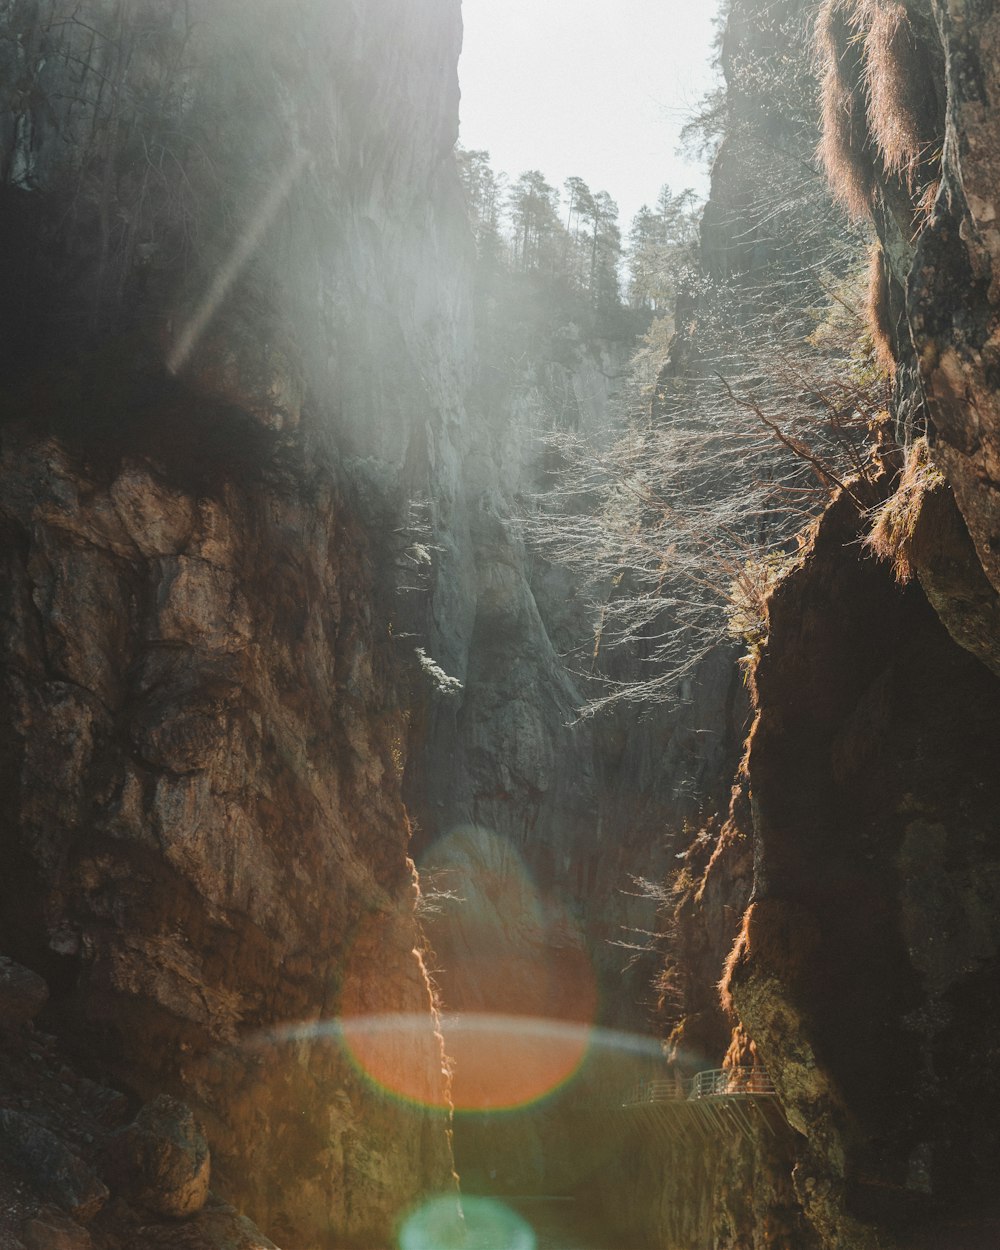 the sun shines brightly through the rocks in a canyon